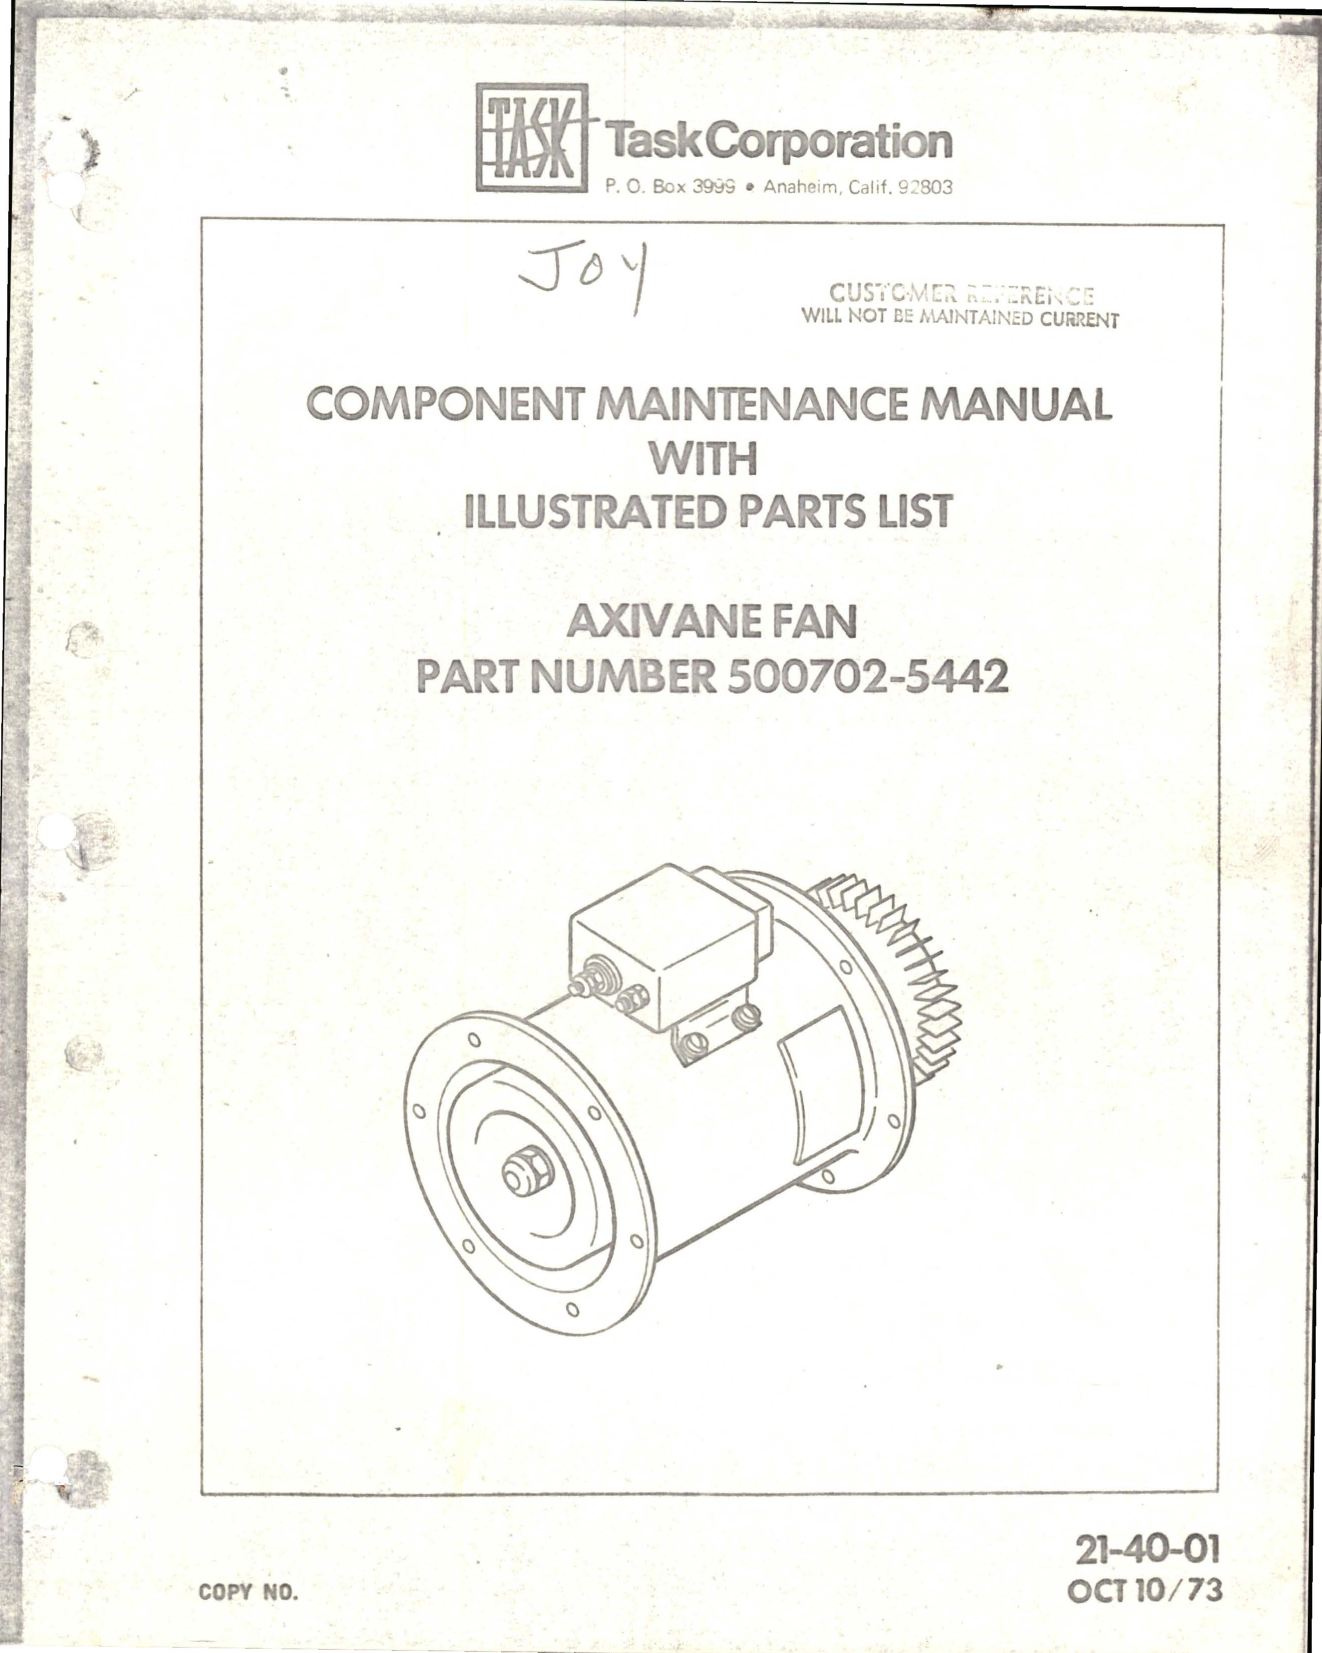 Sample page 1 from AirCorps Library document: Illustrated Parts Breakdown for Aircraft Heater Assembly - Part N88A92